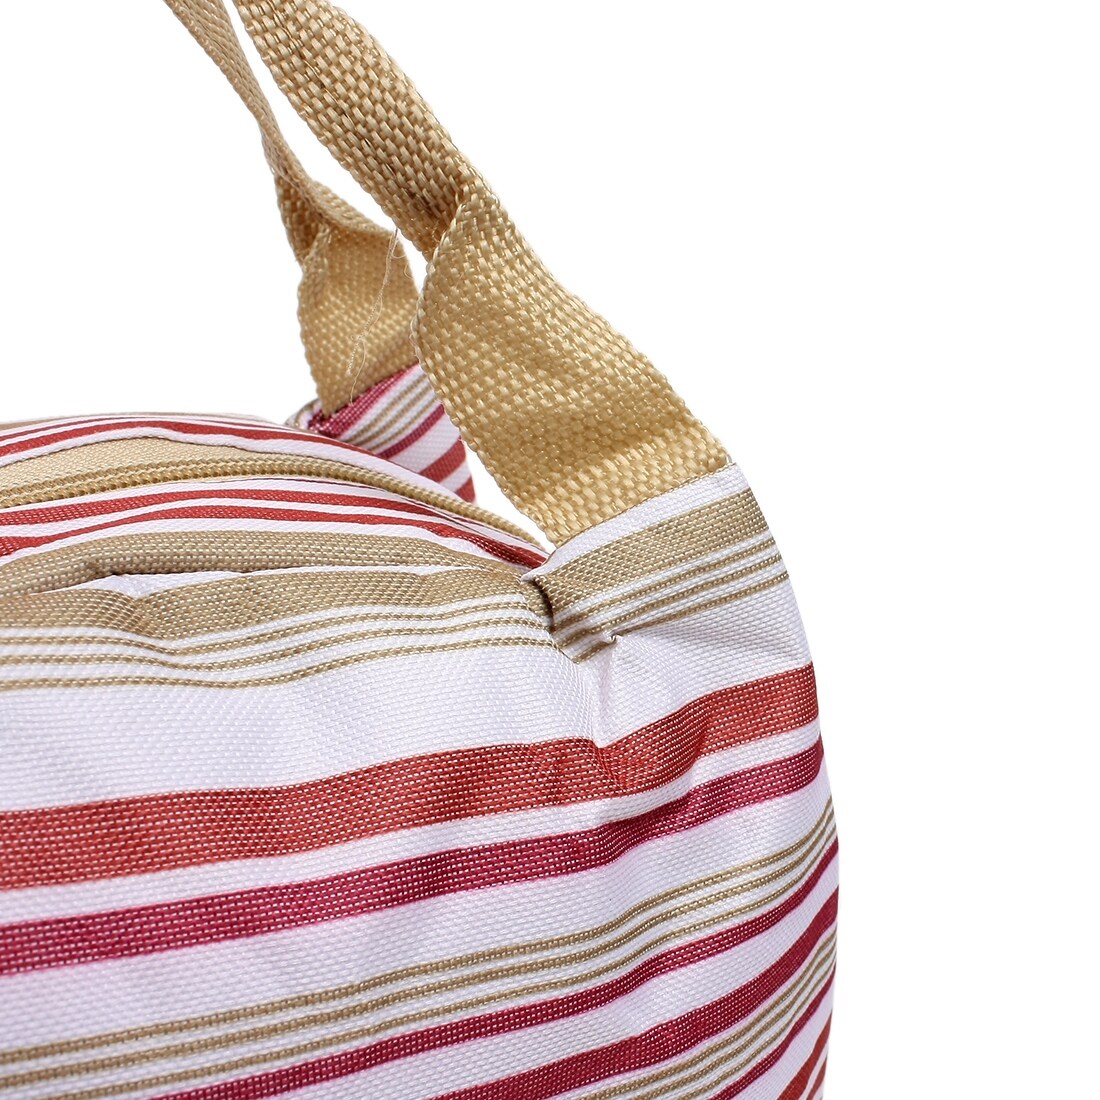 Canvas Picnic Lunch Drink Thermal Insulated Cooler Tote Storage Bag Brown Stripe - White,Fuchsia